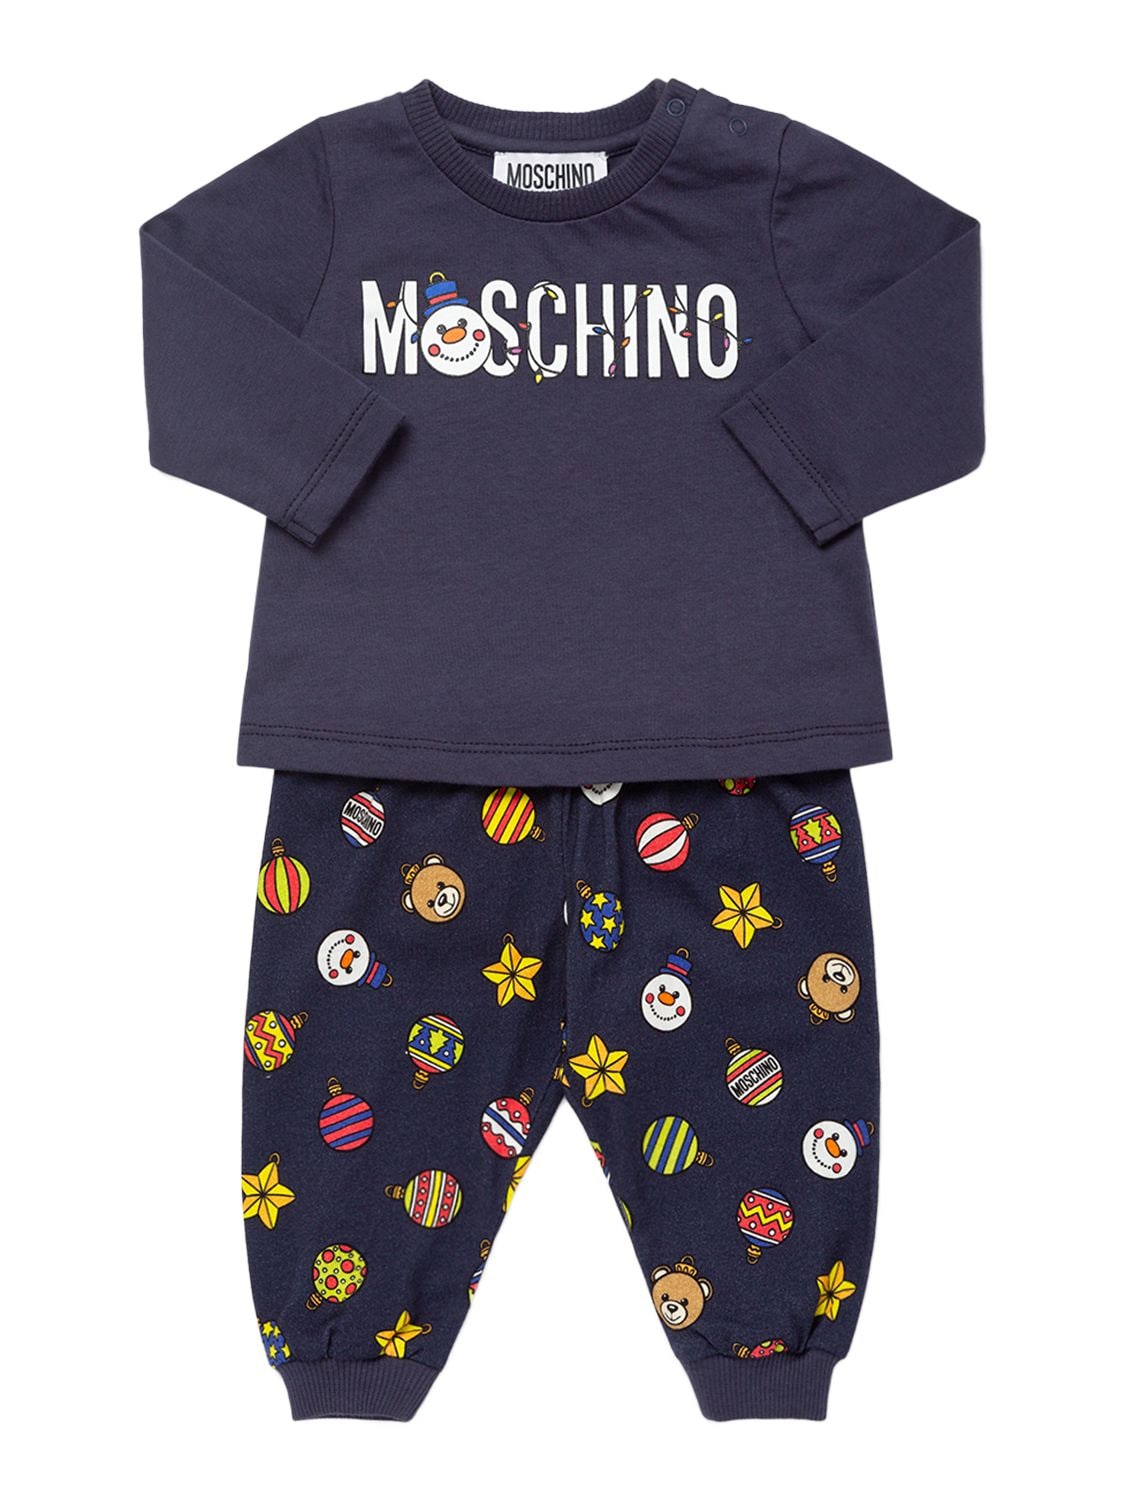 Moschino Kids' Printed Cotton Jersey T-shirt & Pants In Navy